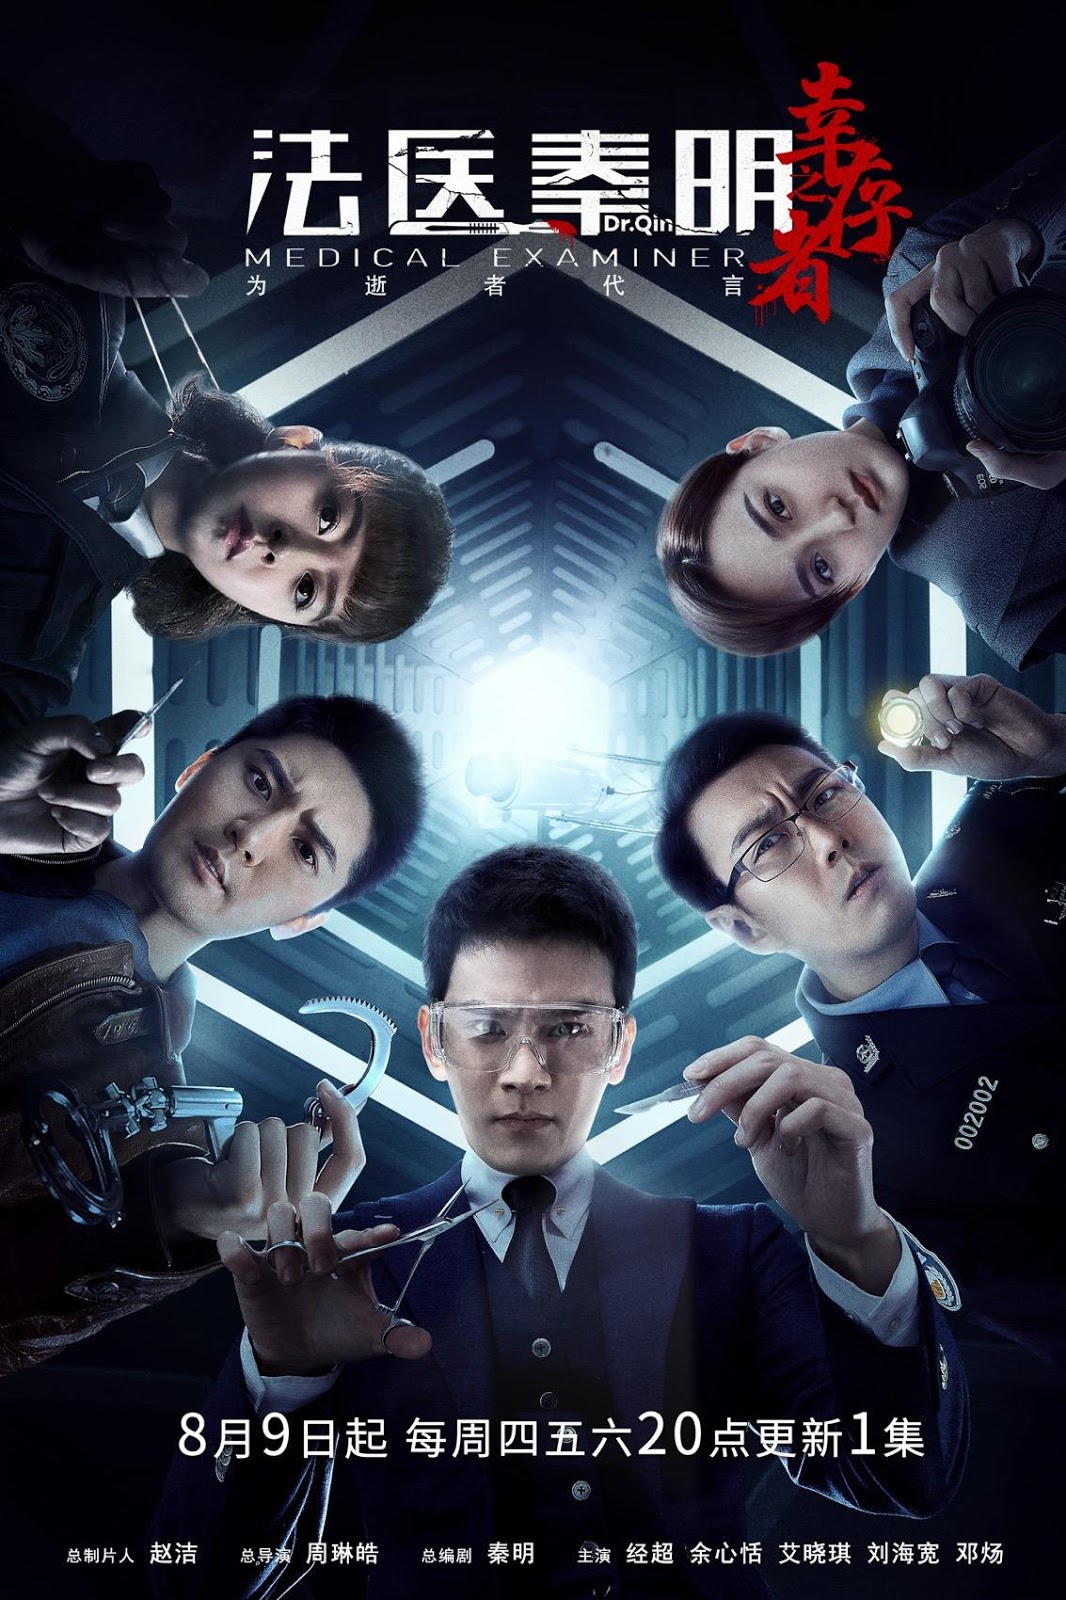 Poster Phim Pháp Y Tần Minh 3 (Medical Examiner Dr. Qin 3)